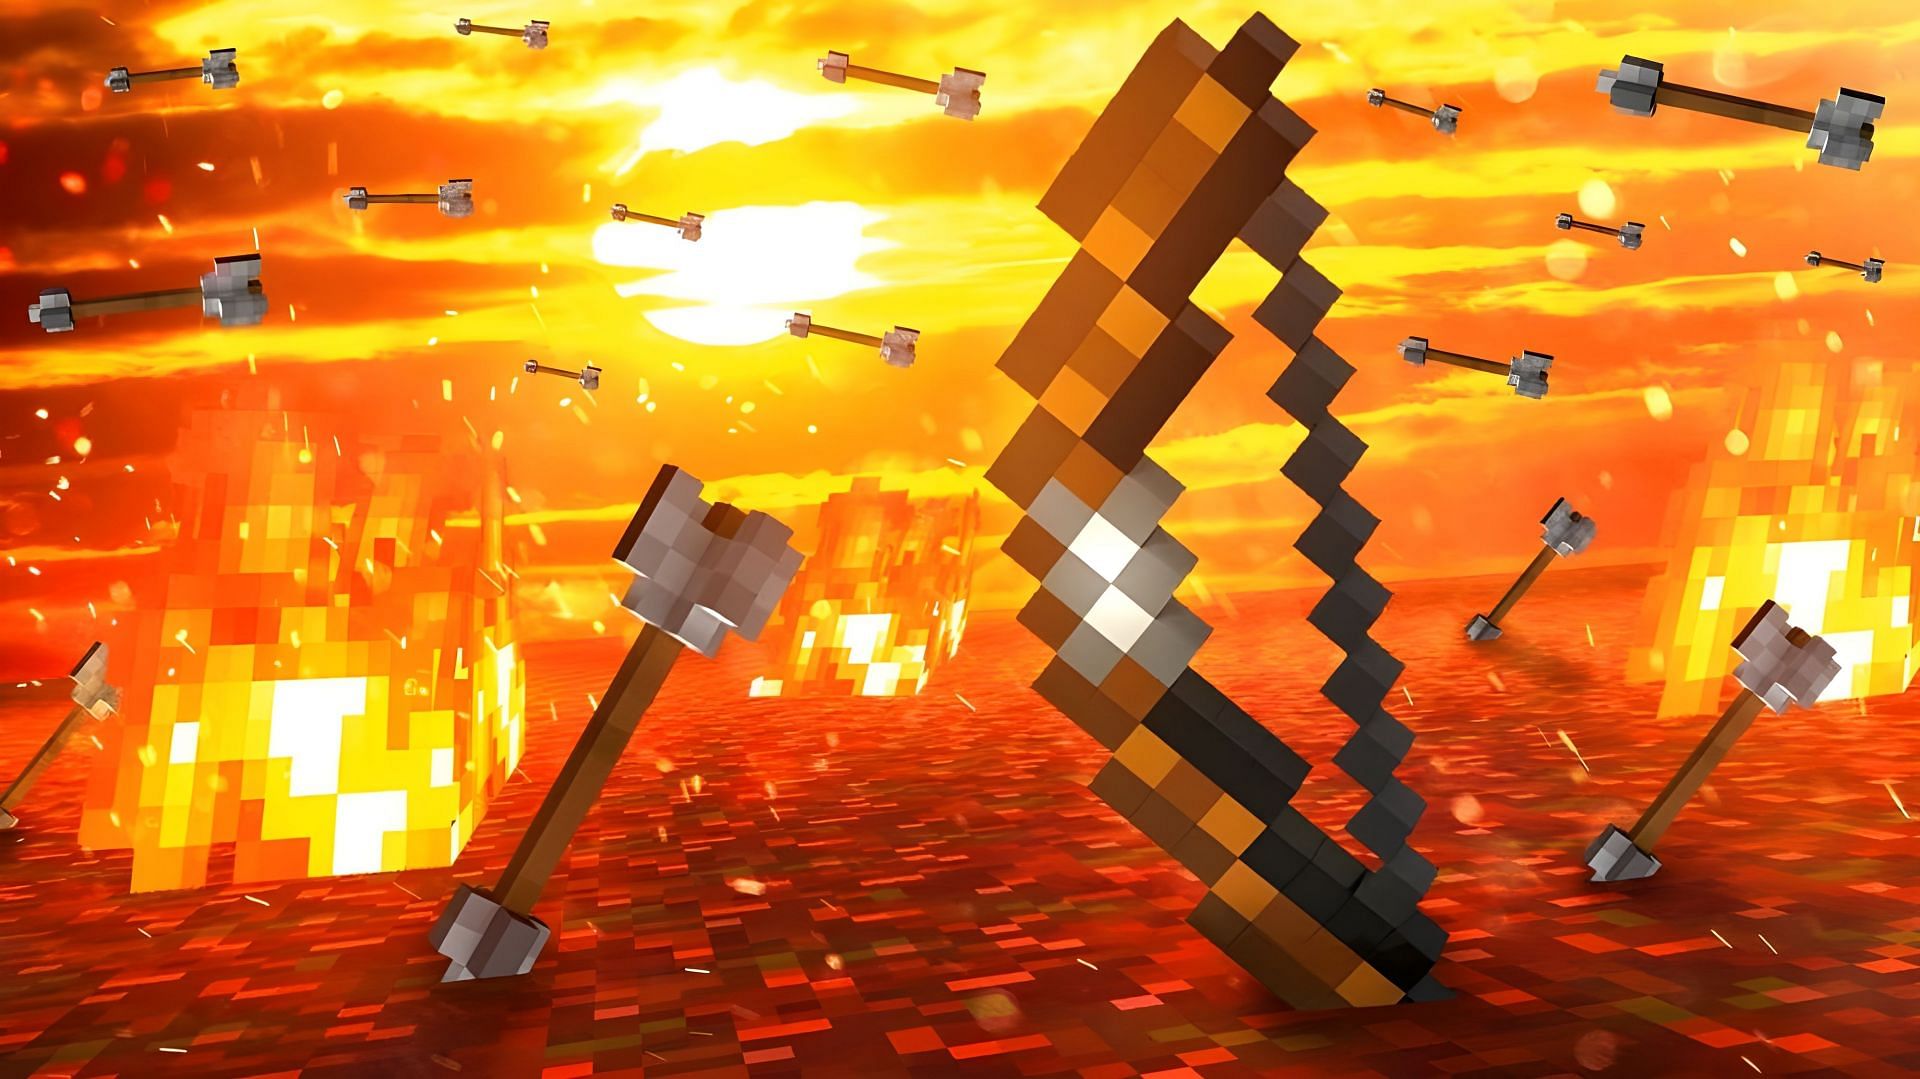 Archery servers are extremely fun to play in Minecraft (Image via Youtube/Cubey)